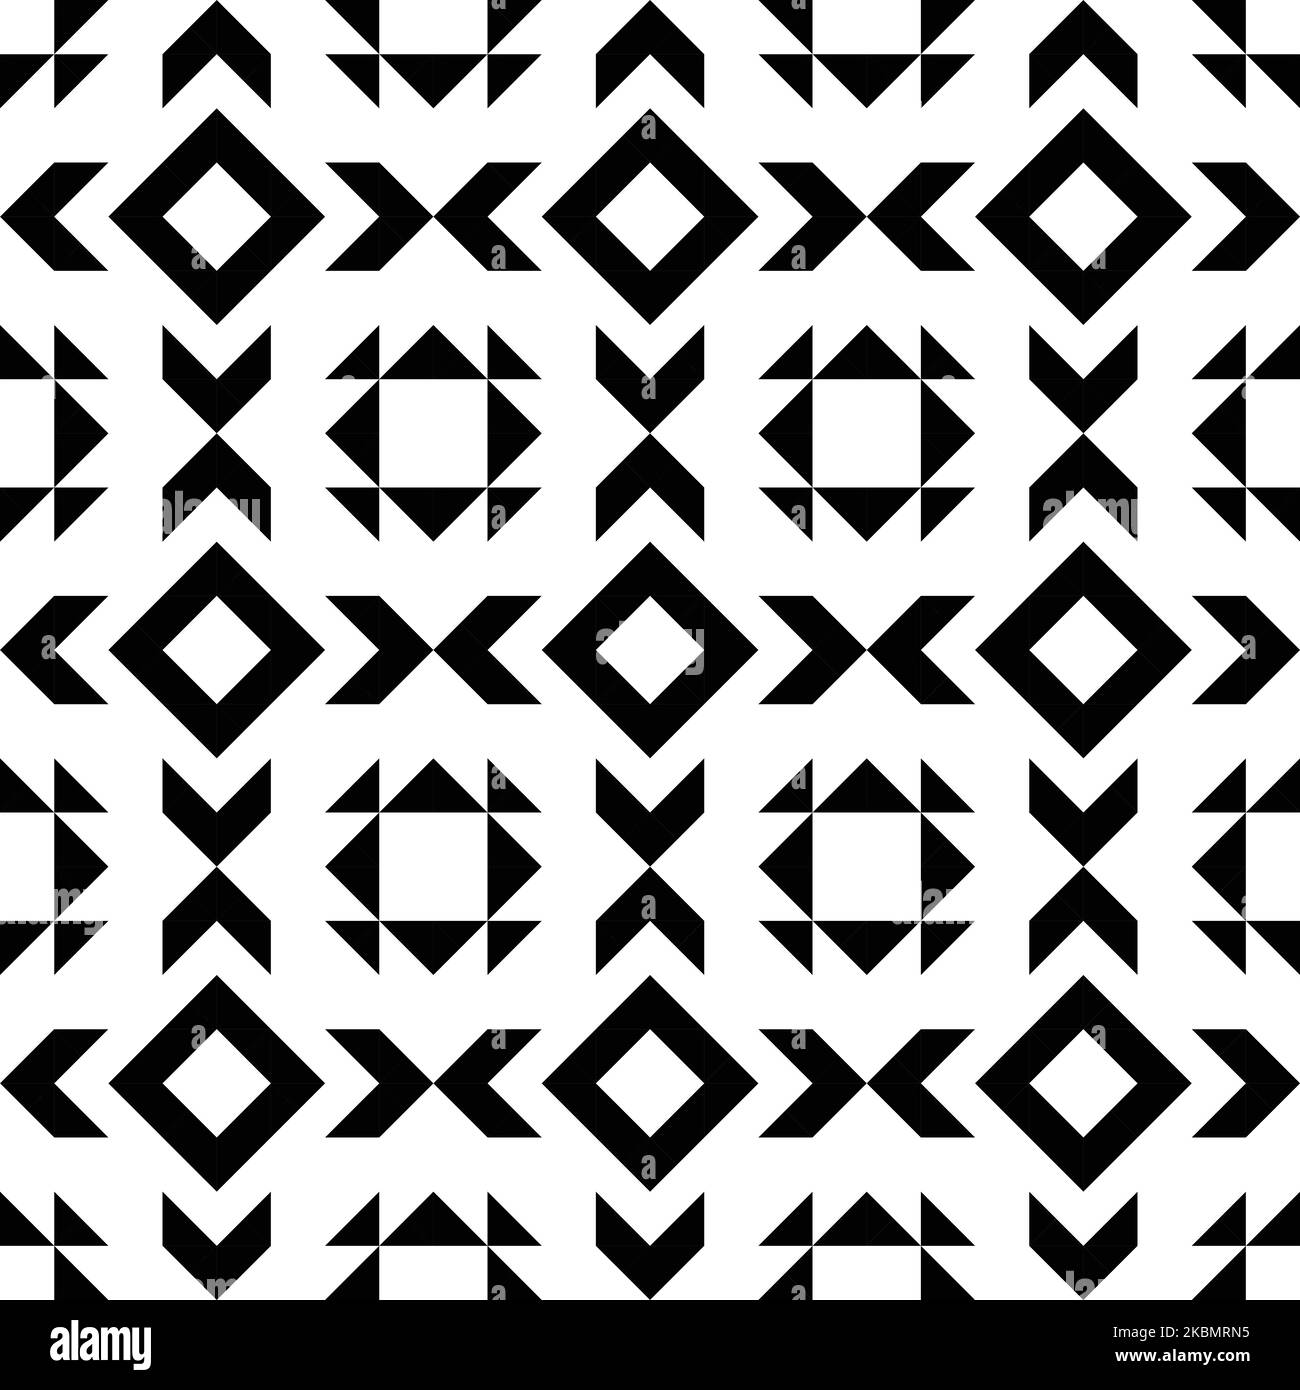 Abstract native american seamless pattern. Geometric embroidery vector illustrations background. Aztec style patterns design.  Stock Vector